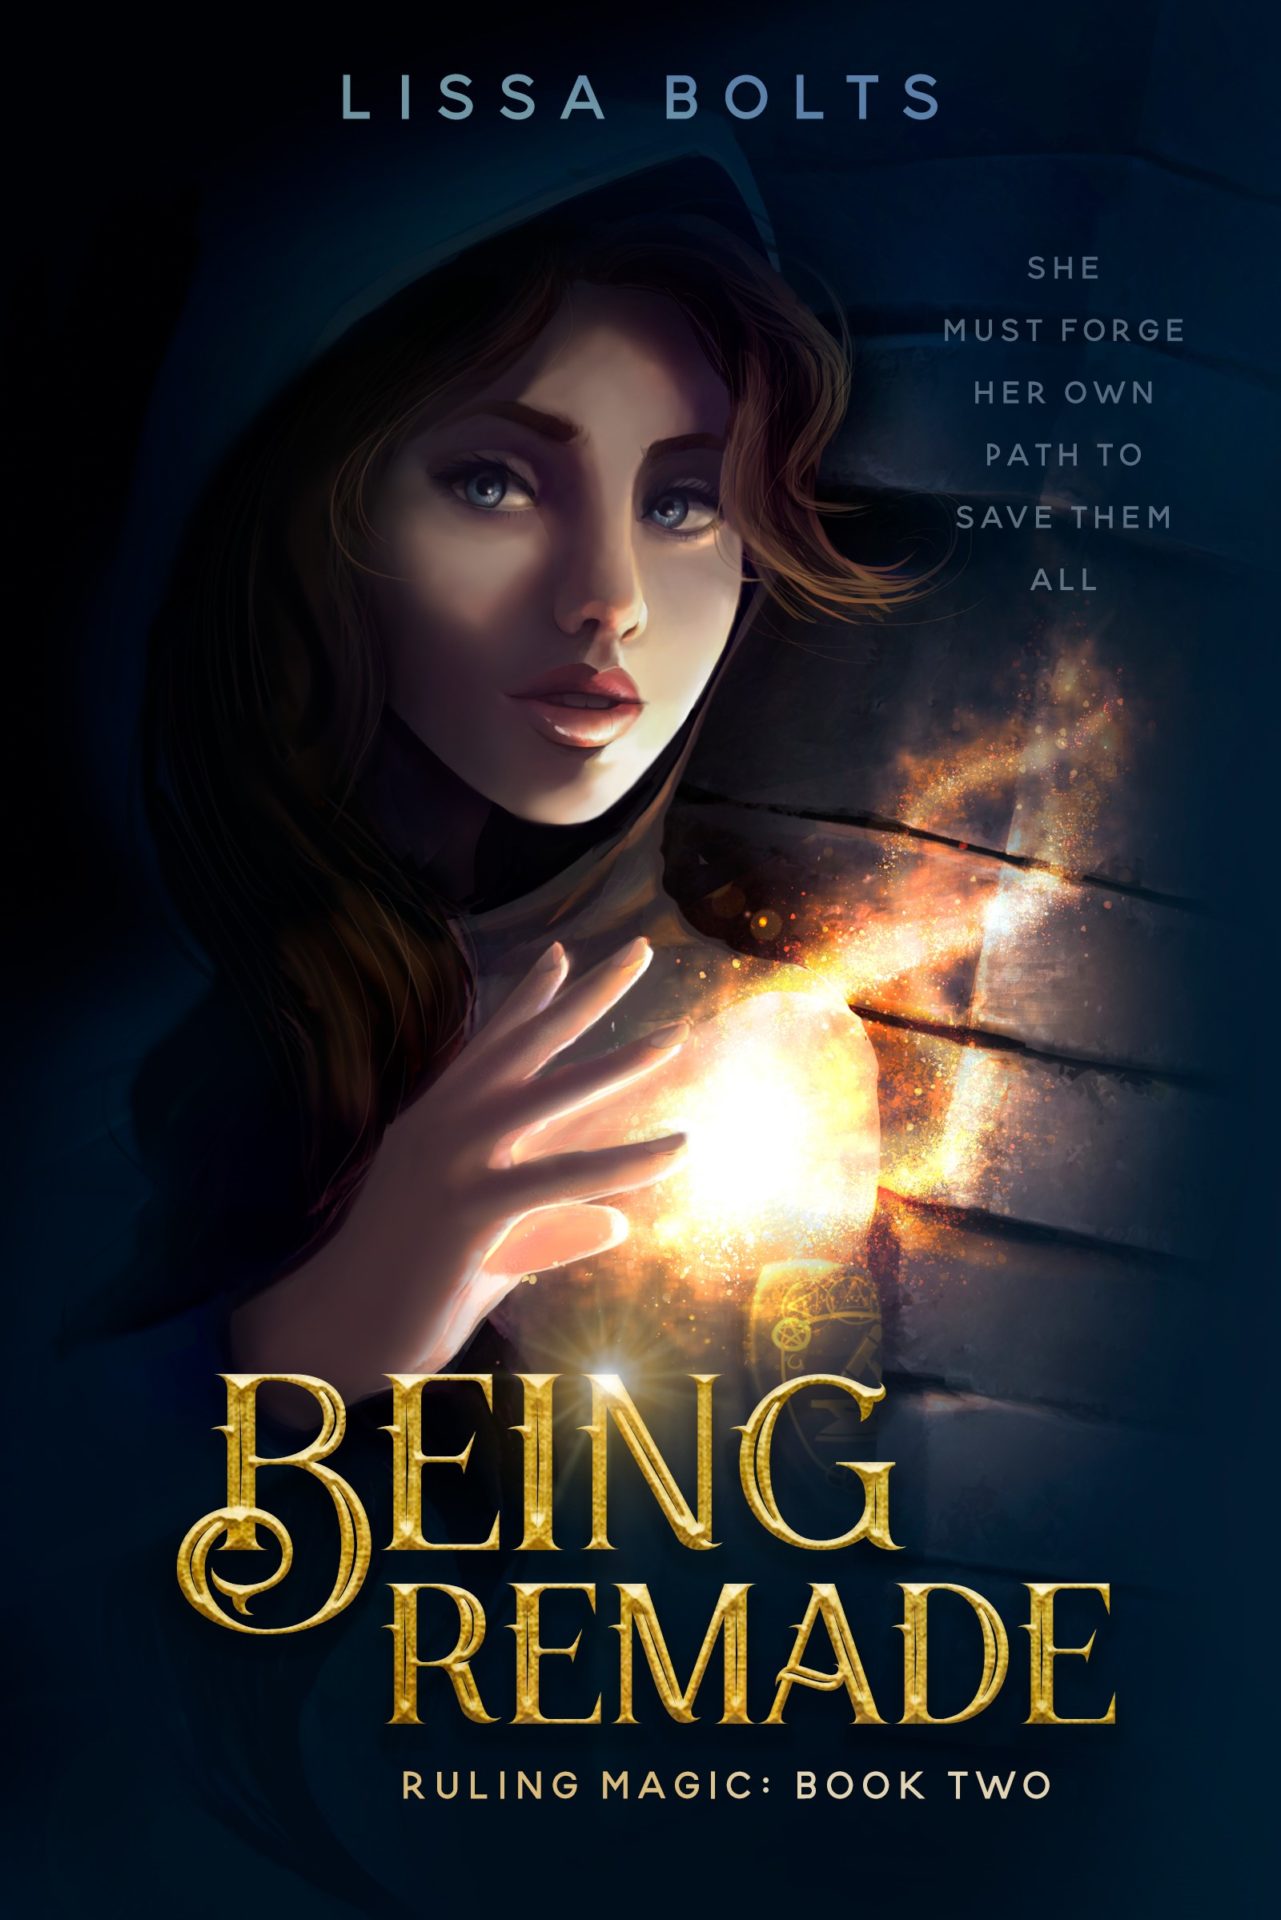 You are currently viewing Being Remade (Ruling Magic Book 2) – Lissa Bolts